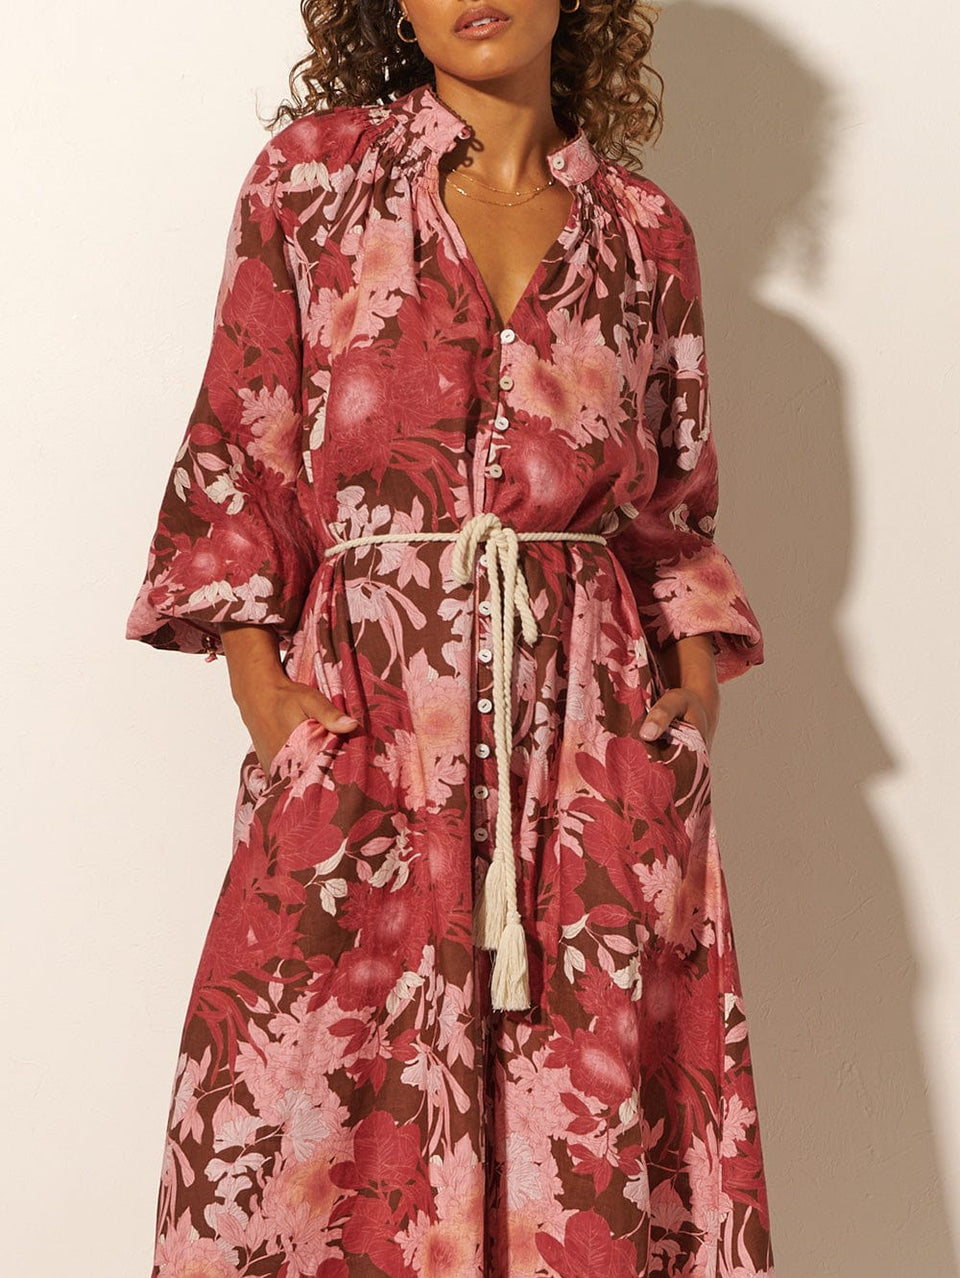 Close-up: Studio model wears KIVARI Hacienda Maxi Dress: A red, pink and brown floral dress with a shirred collar, button-through front, waist ties and full-length sleeves, crafted from sustainable LENZING Viscose Crepe.